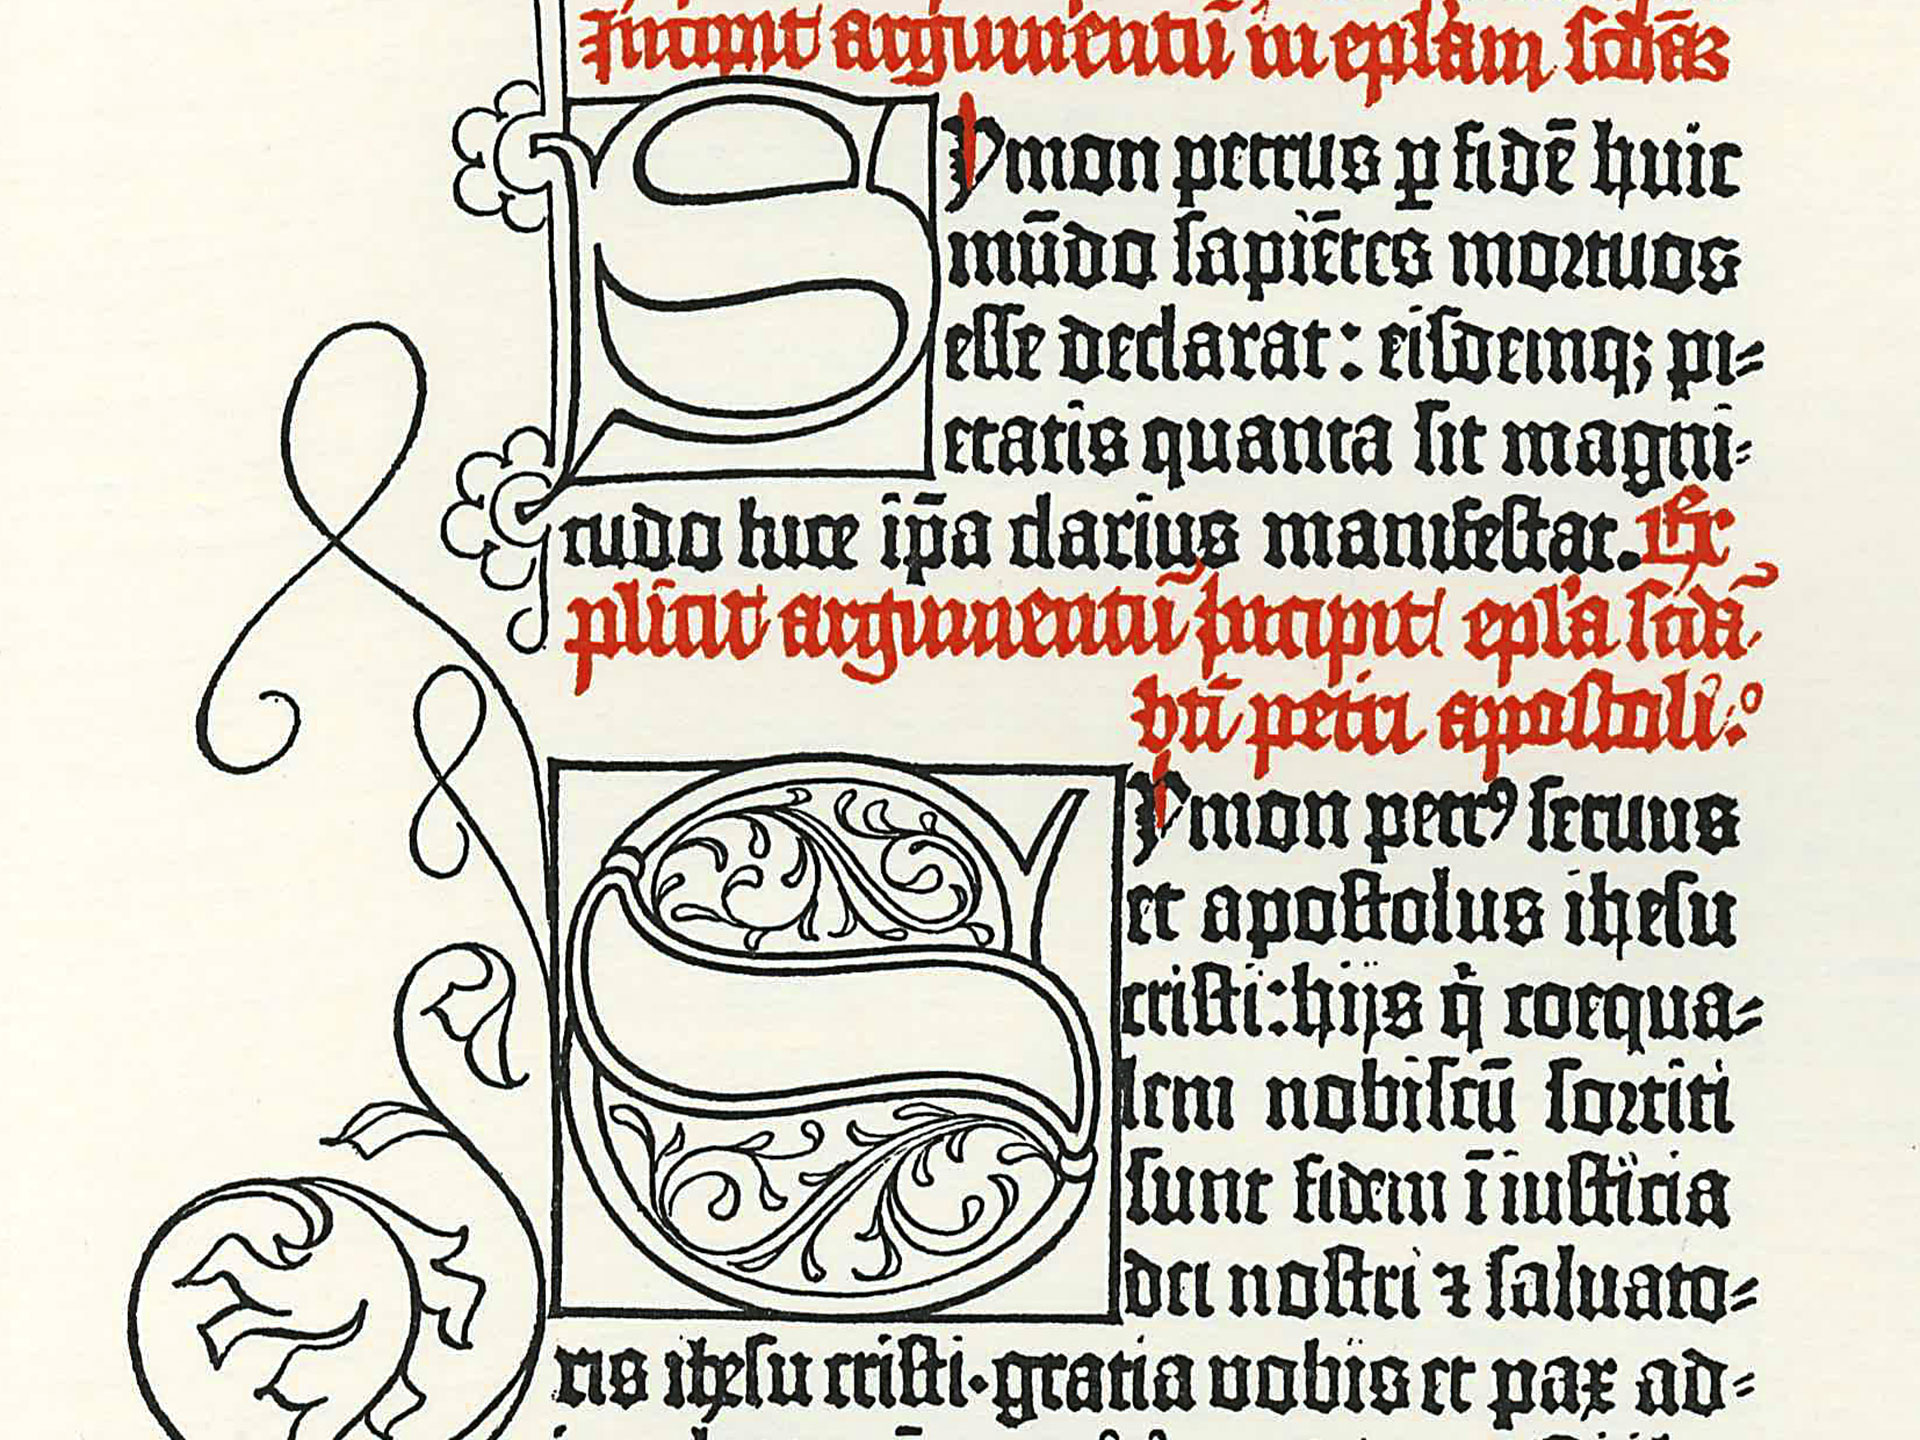 The Second Epistle of Peter. Press print from the Gutenberg Bible